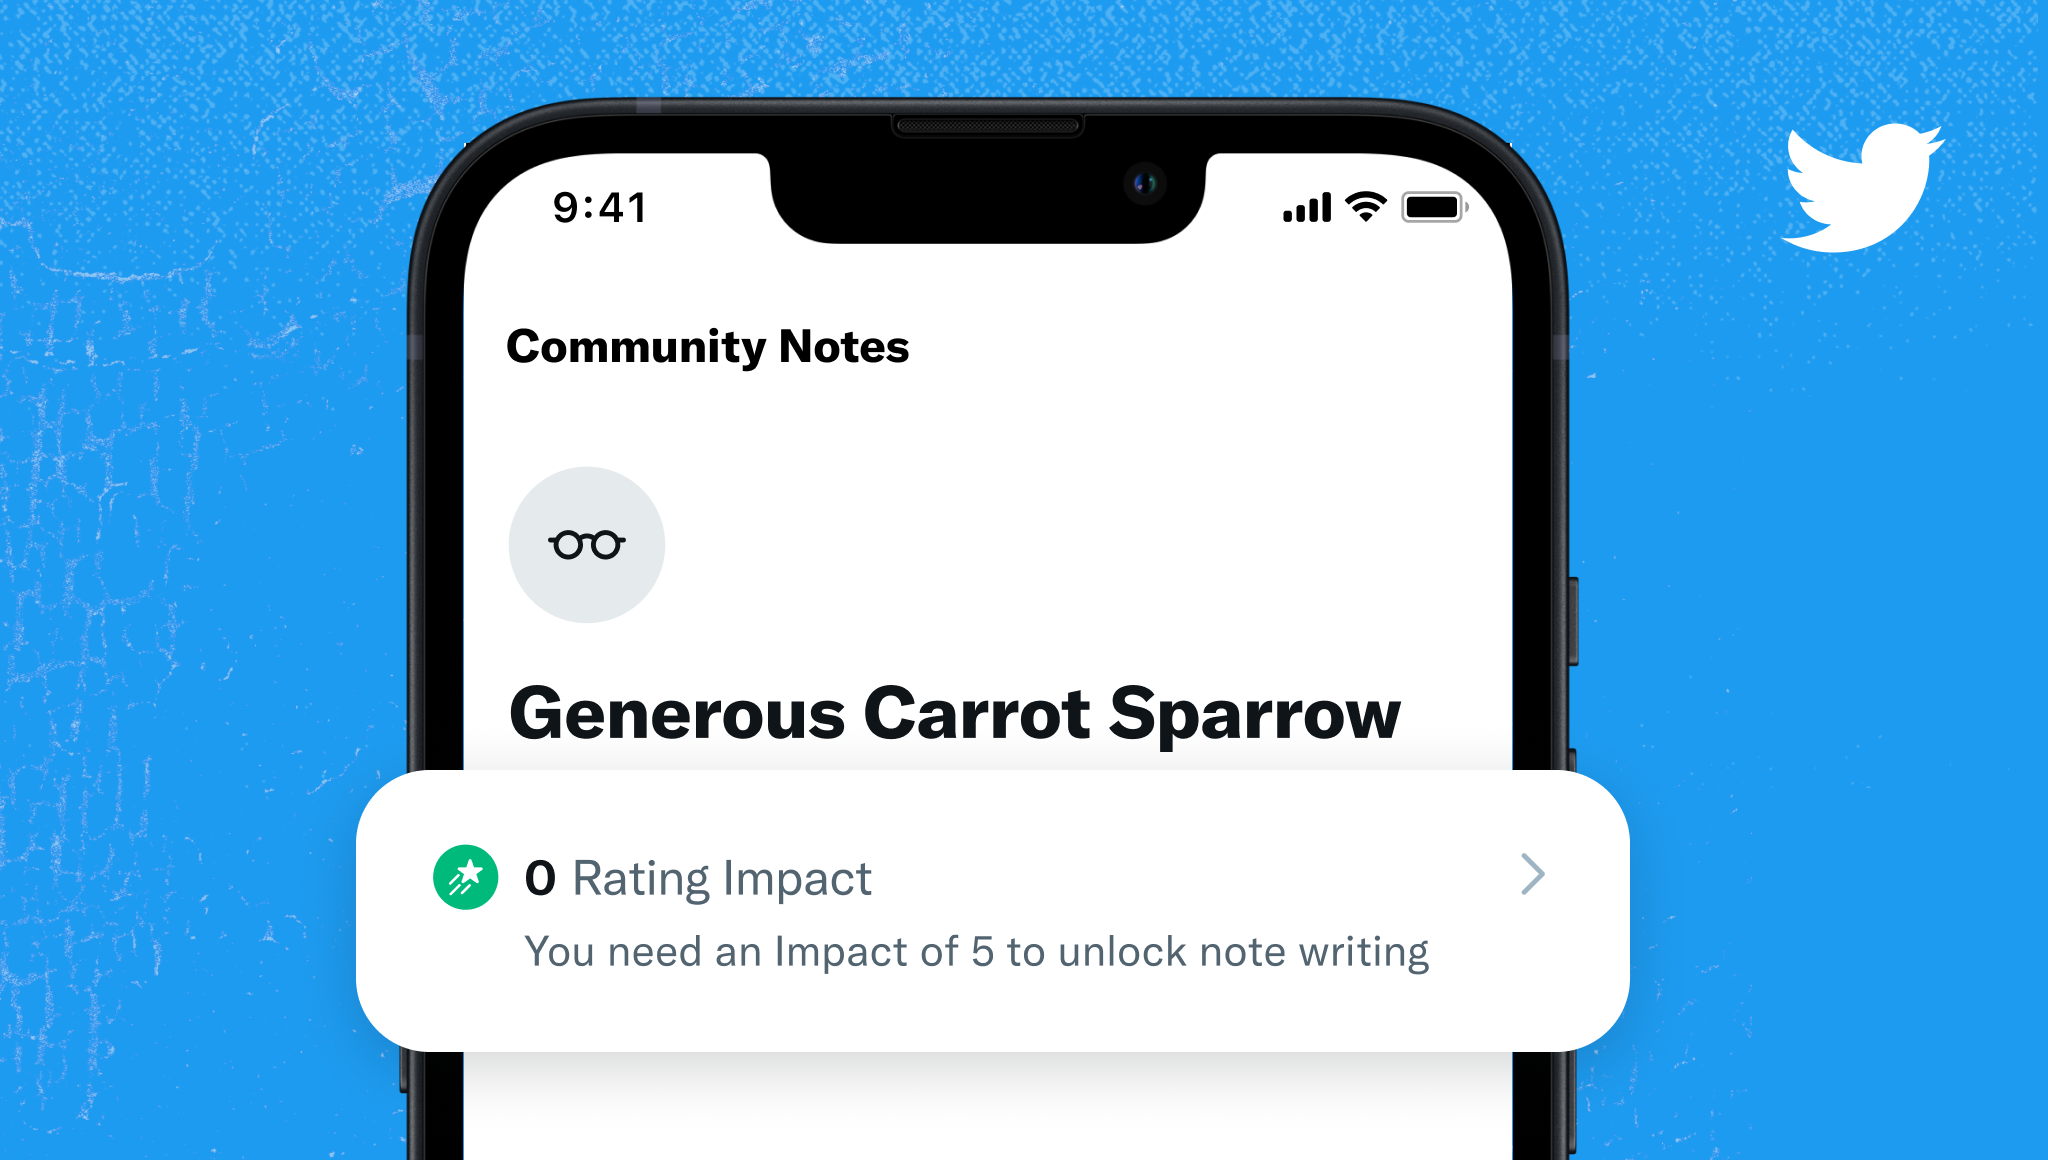 Twitter Community Notes to Require Contributors to Provide